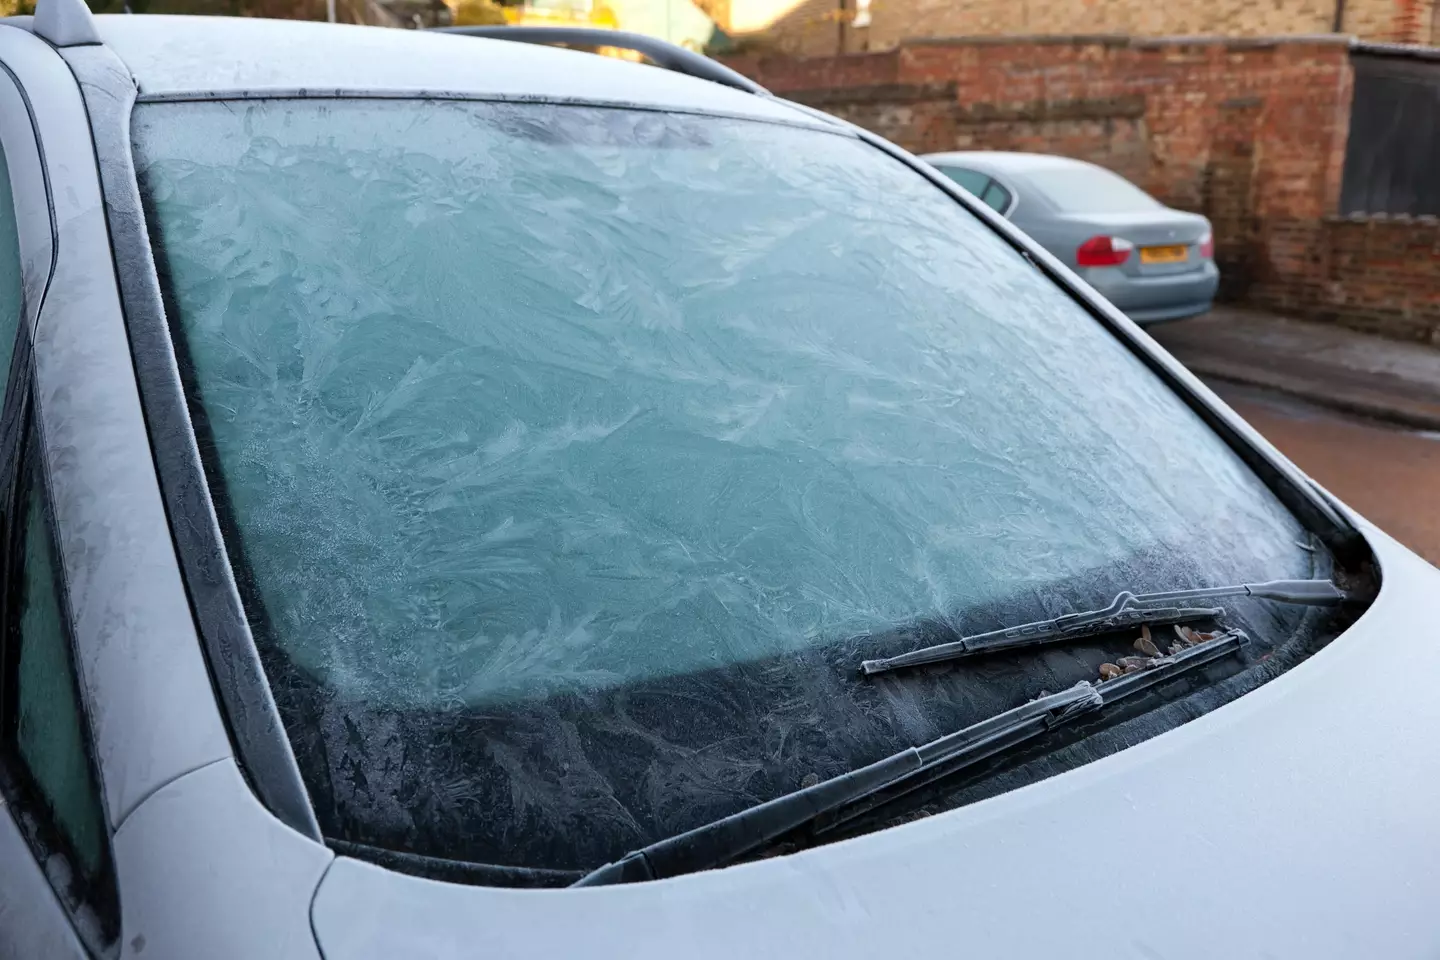 One expert has warned drivers not to press the 'air circulation' button when trying to de-ice the car.